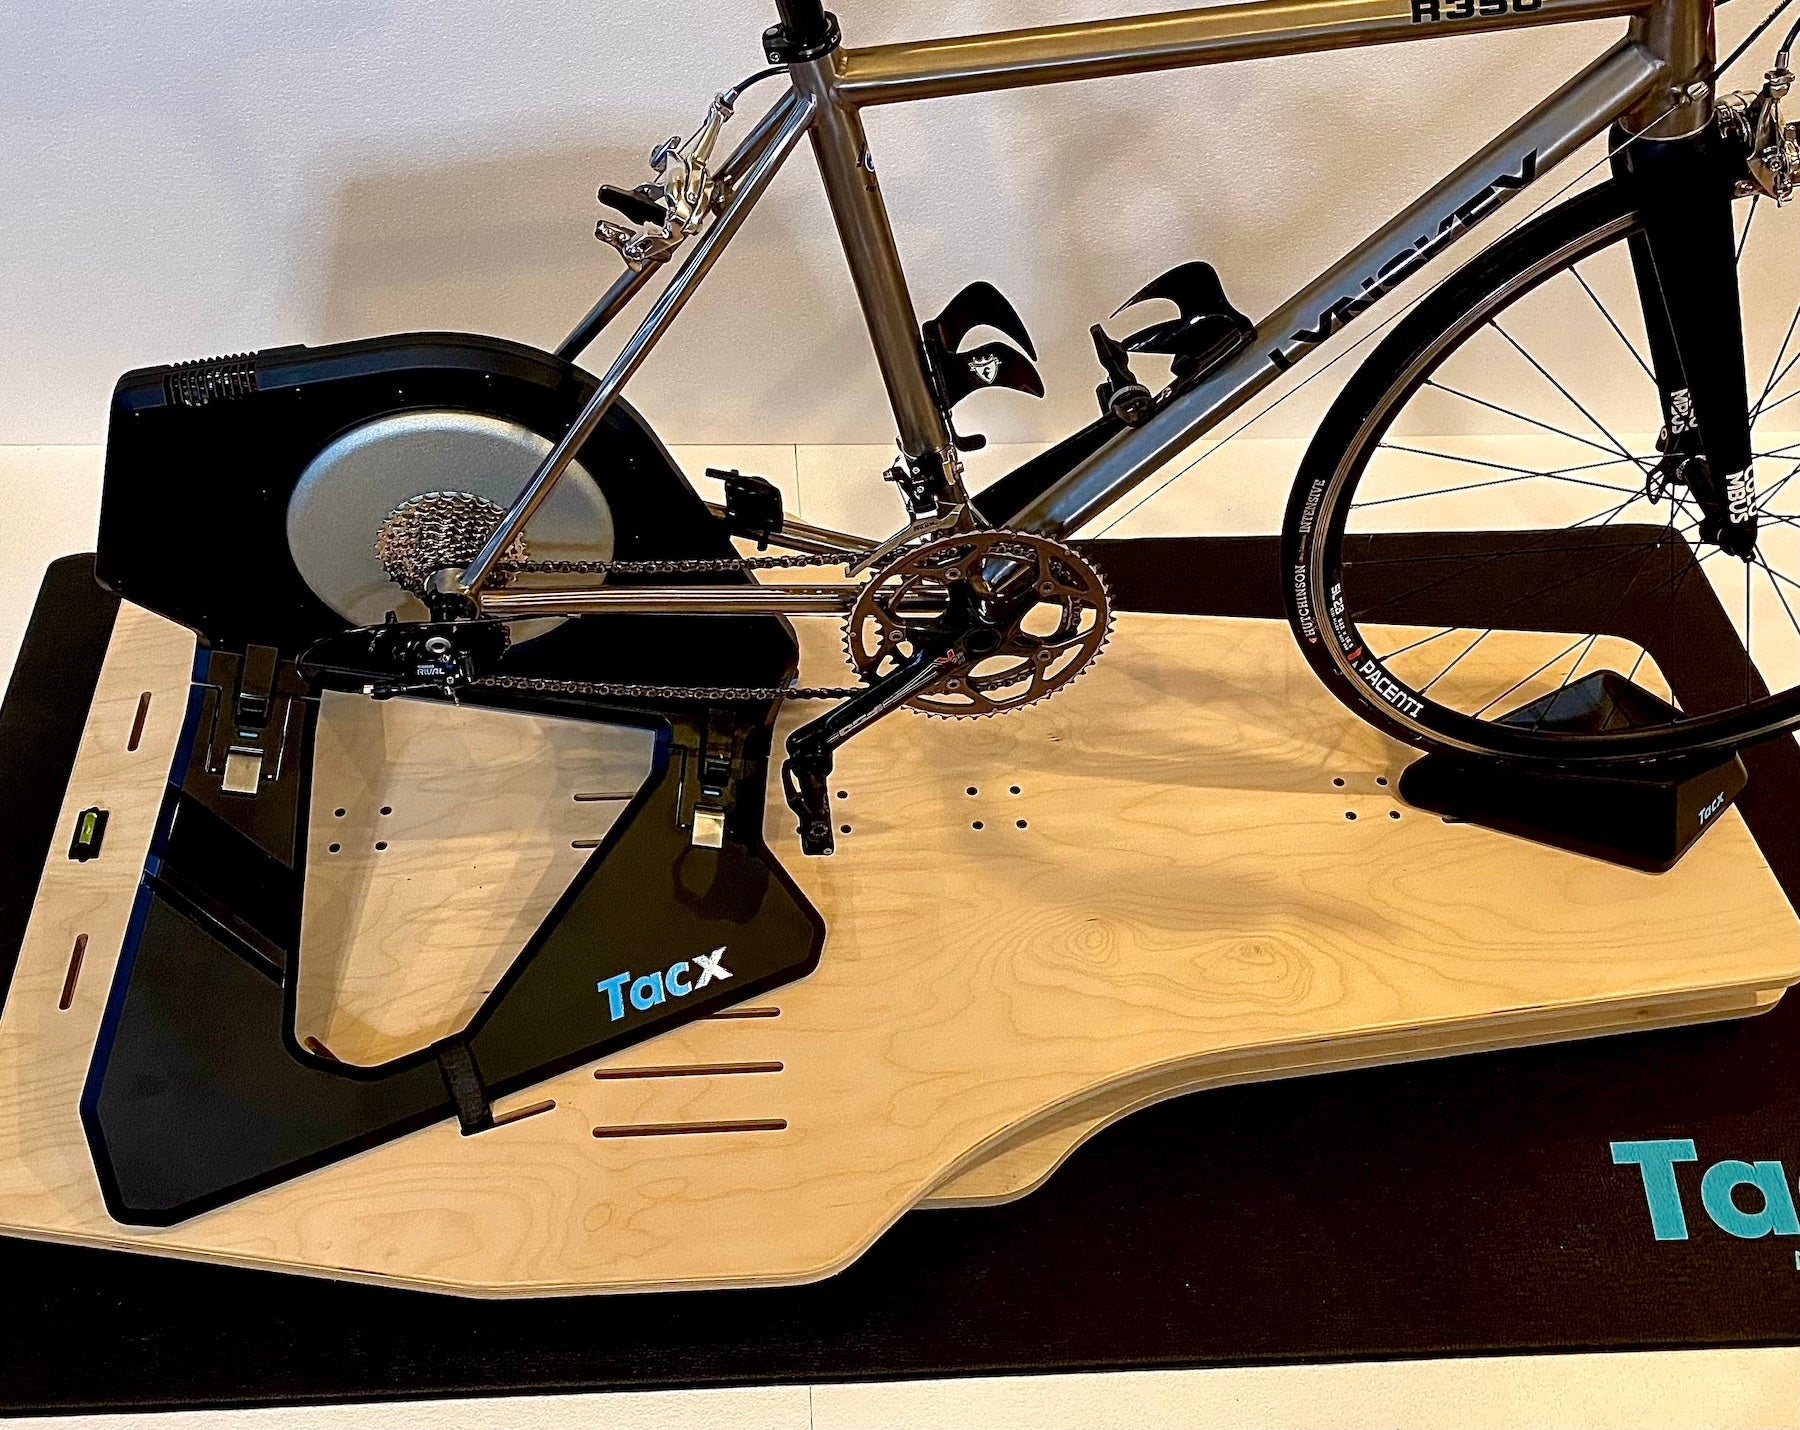 An unpainted Velocity Rocker rocker plate with a Lynskey titanium bike and Tacx Neo 2T smart trainer attached.